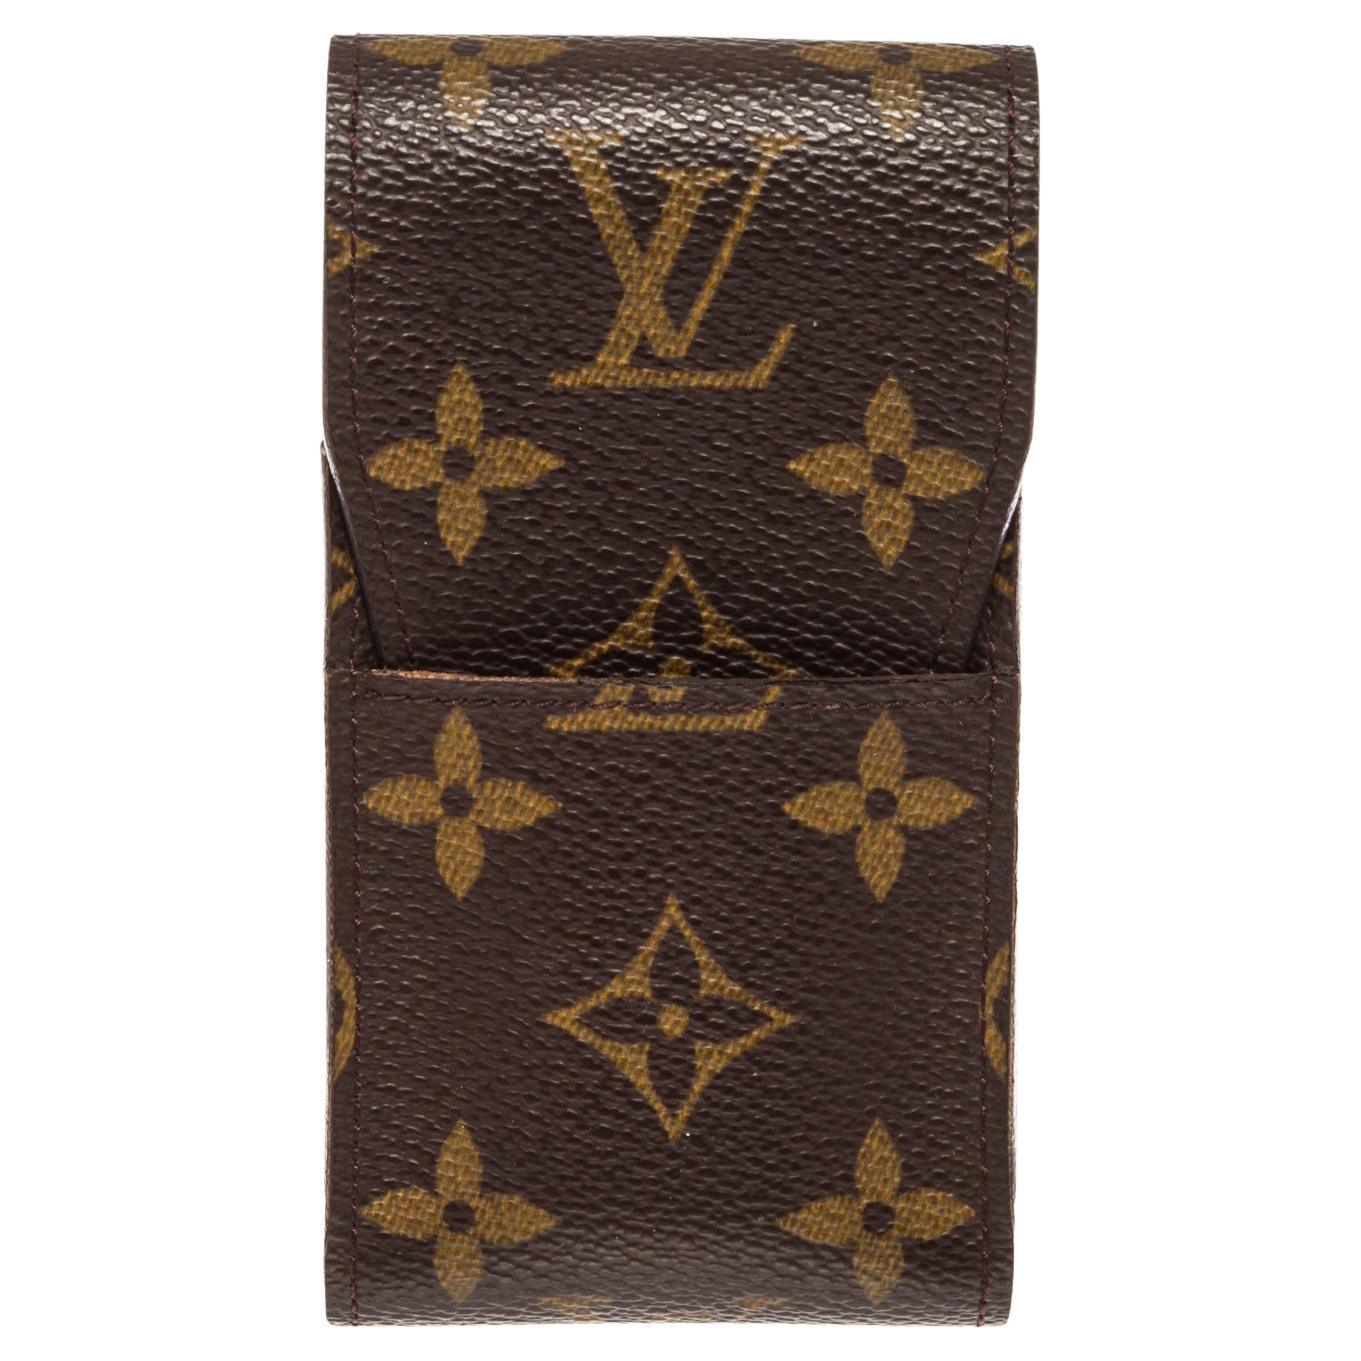 Brown and tan monogram coated canvas Louis Vuitton cigarette holder with leather